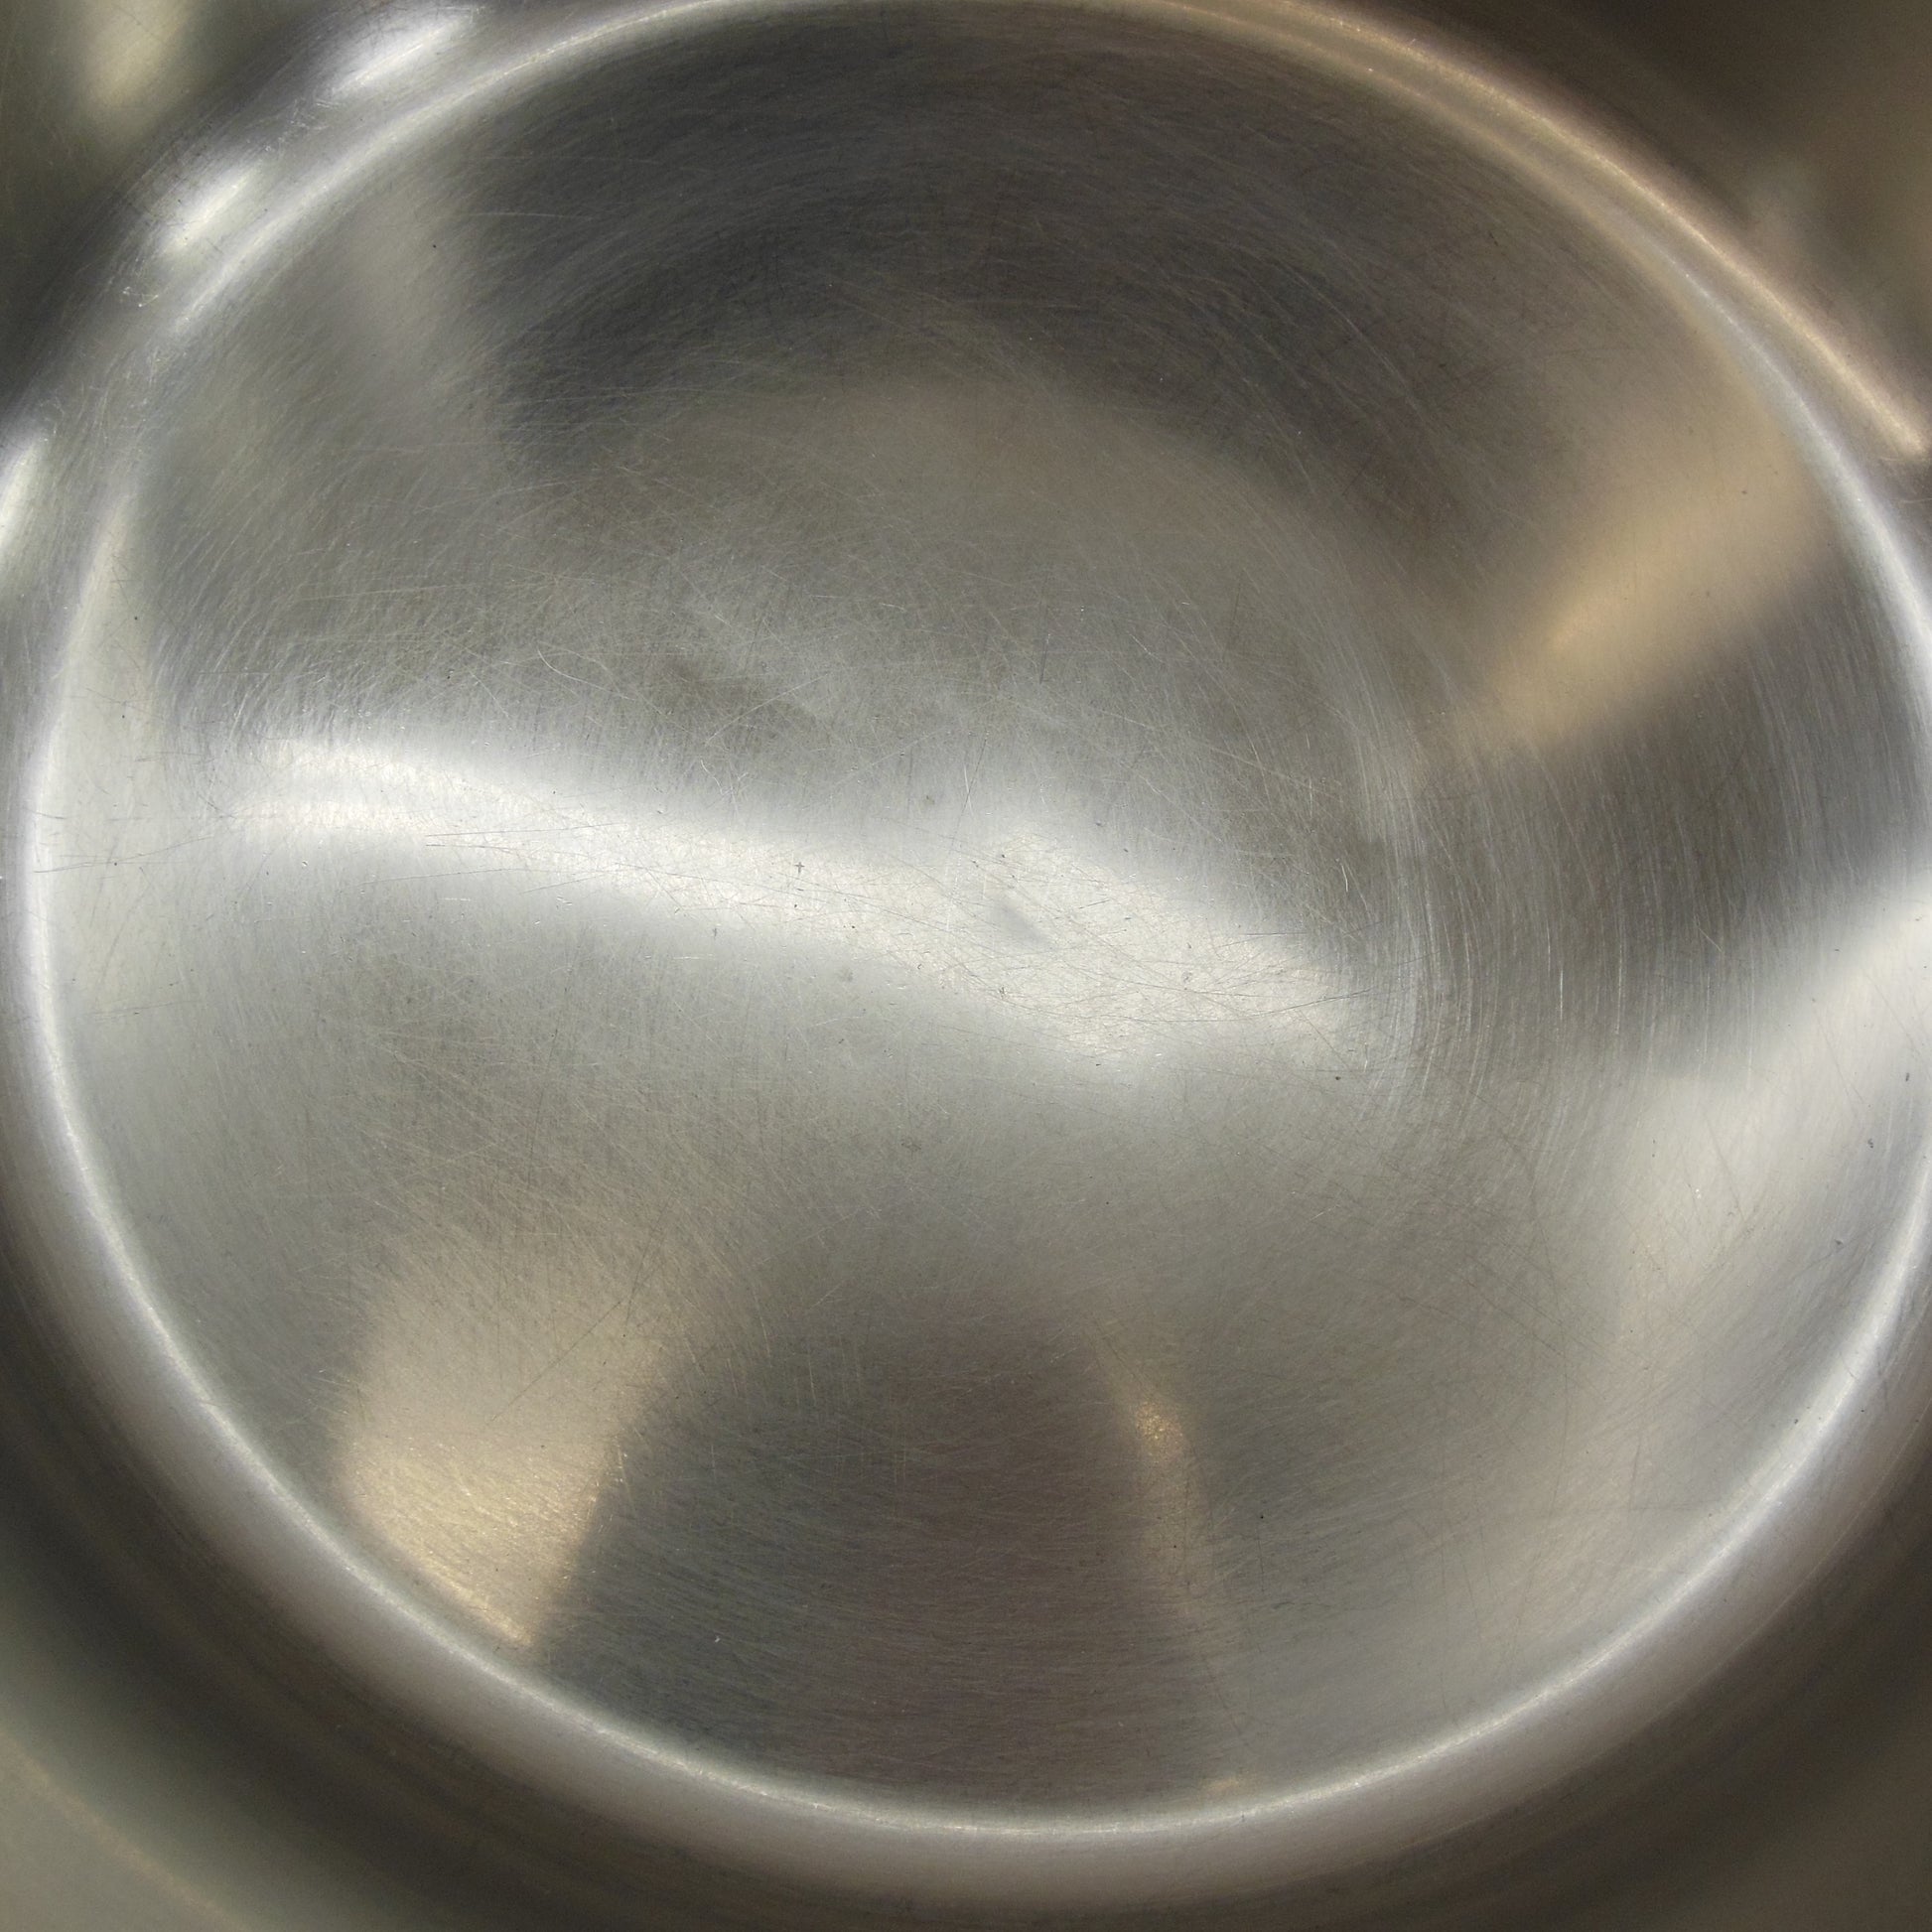 All-Clad Ltd USA 8 Quart Stock Soup Pot Stainless Steel - Discounted crease